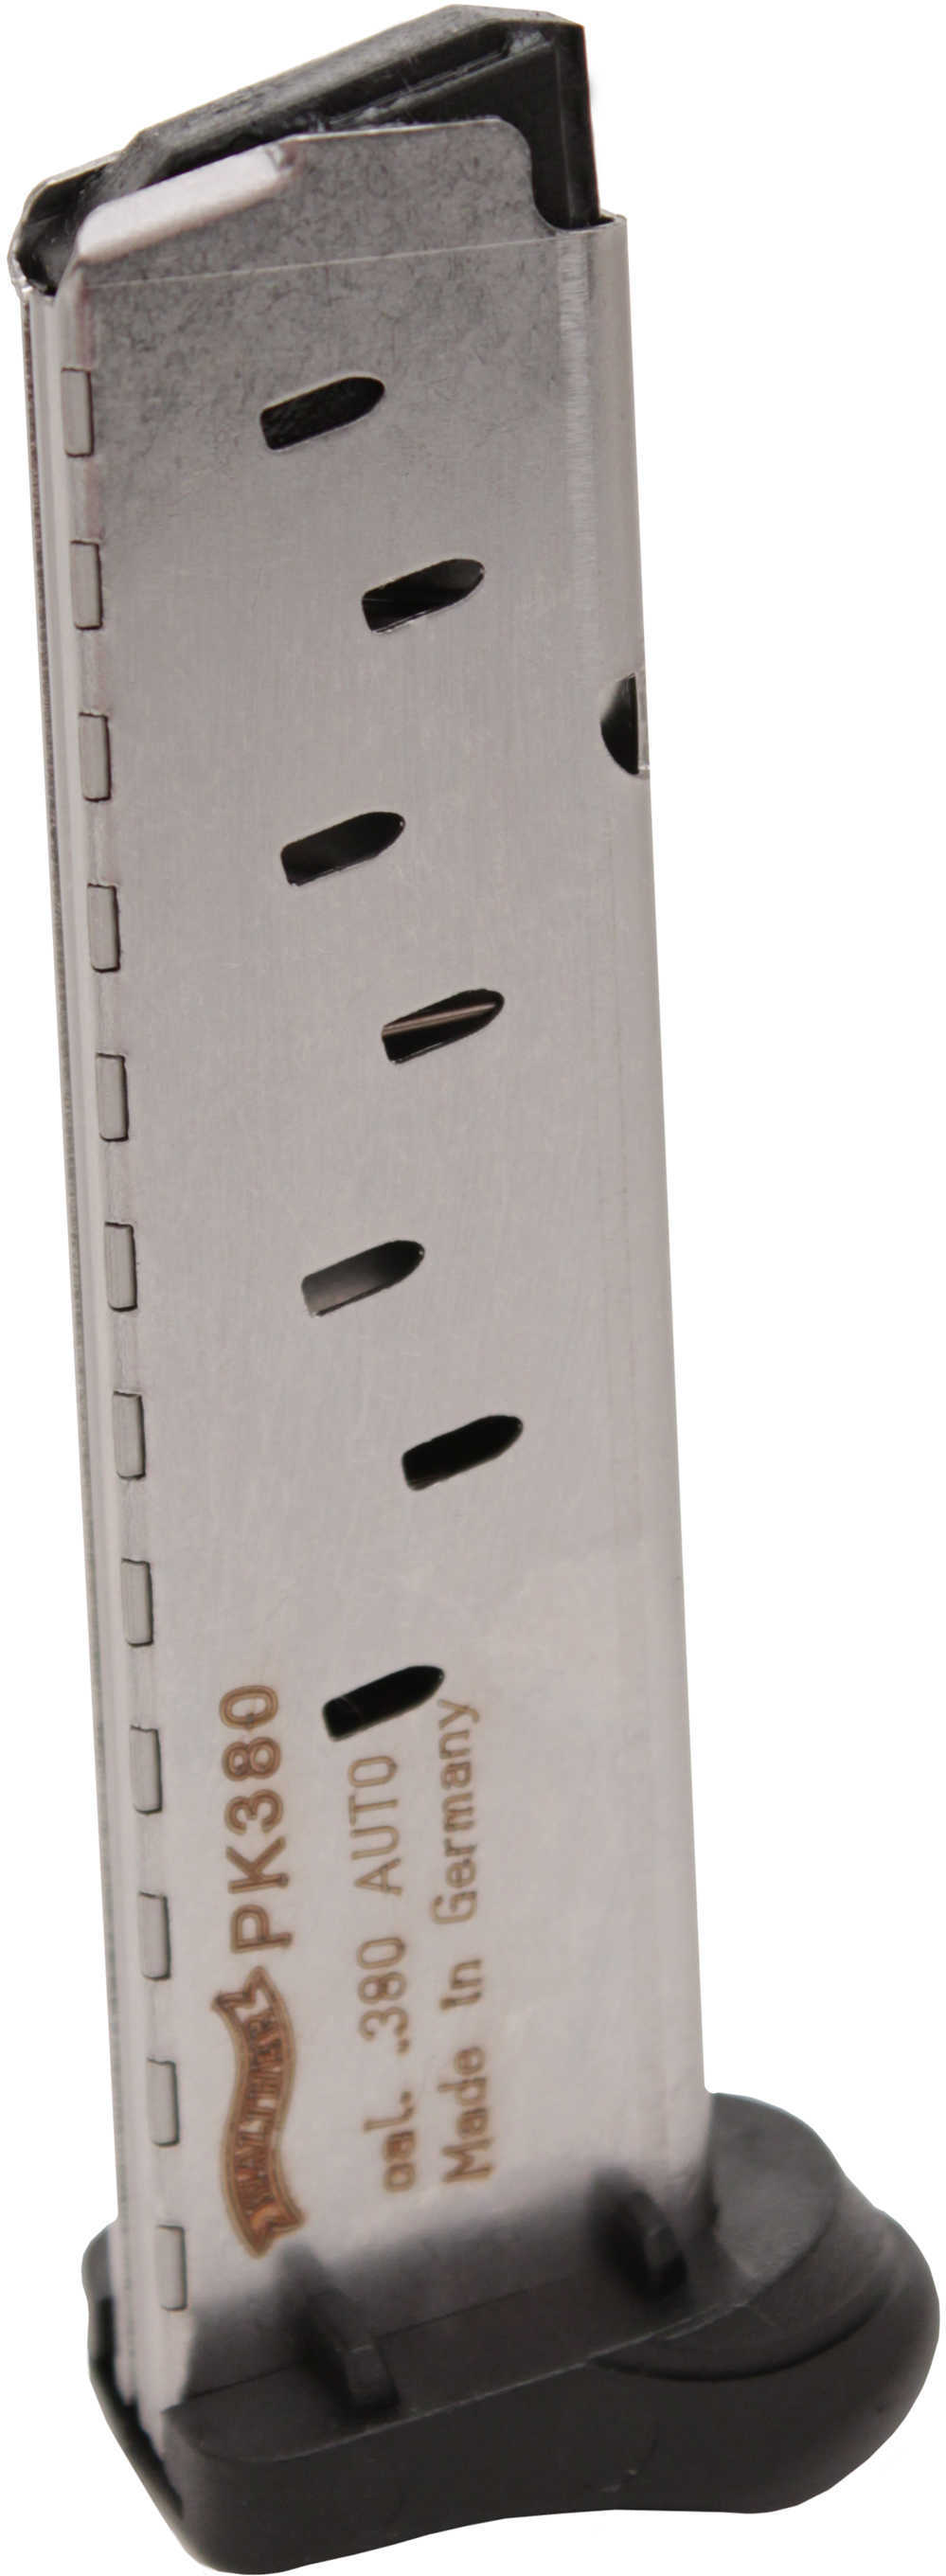 Walther Magazine 380 ACP 8Rd Fits PK380 Stainless 505600